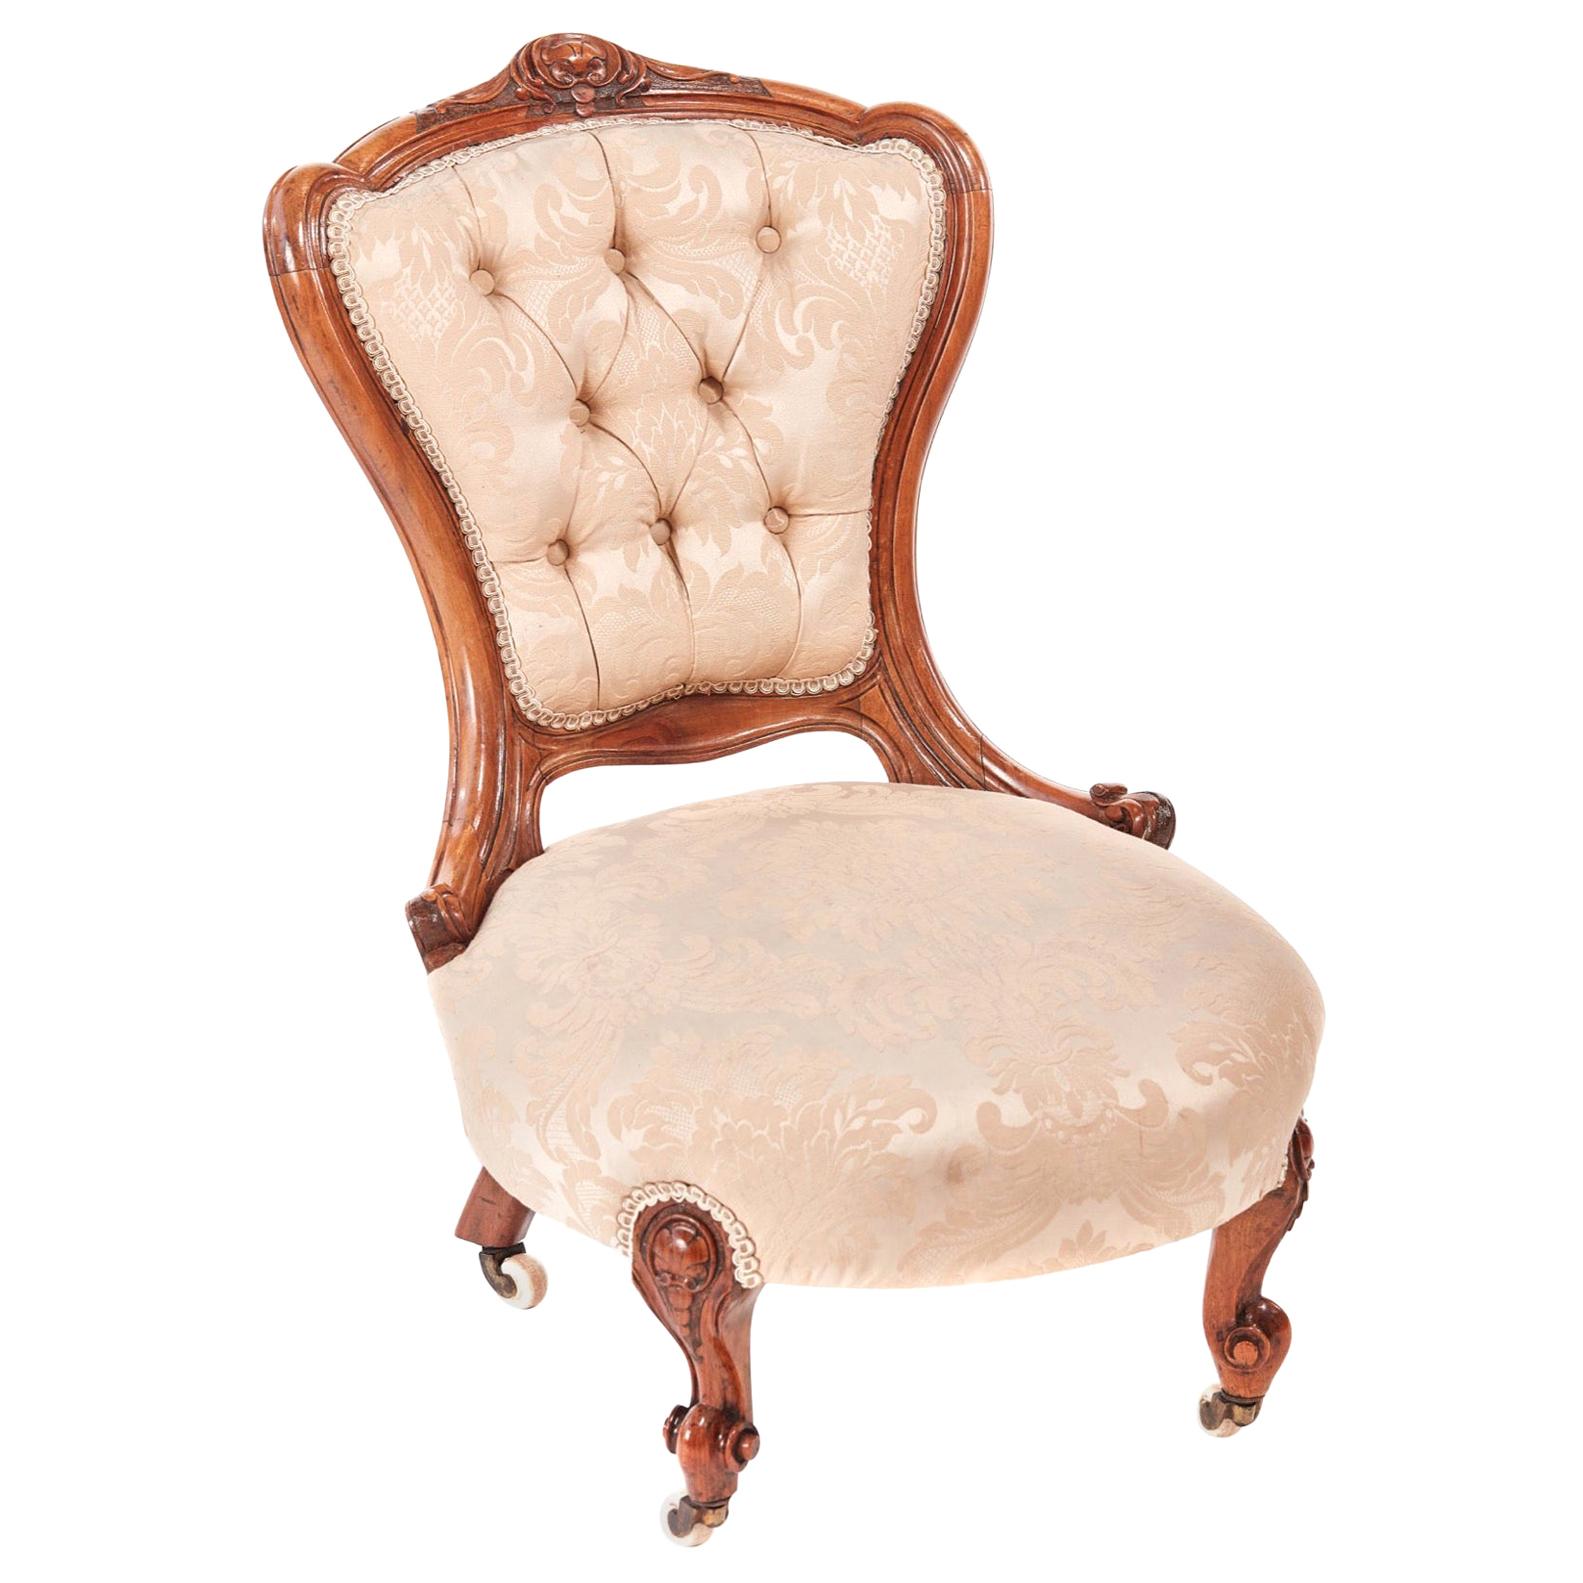 19th Centuy Antique Victorian Carved Walnut Ladies Chair